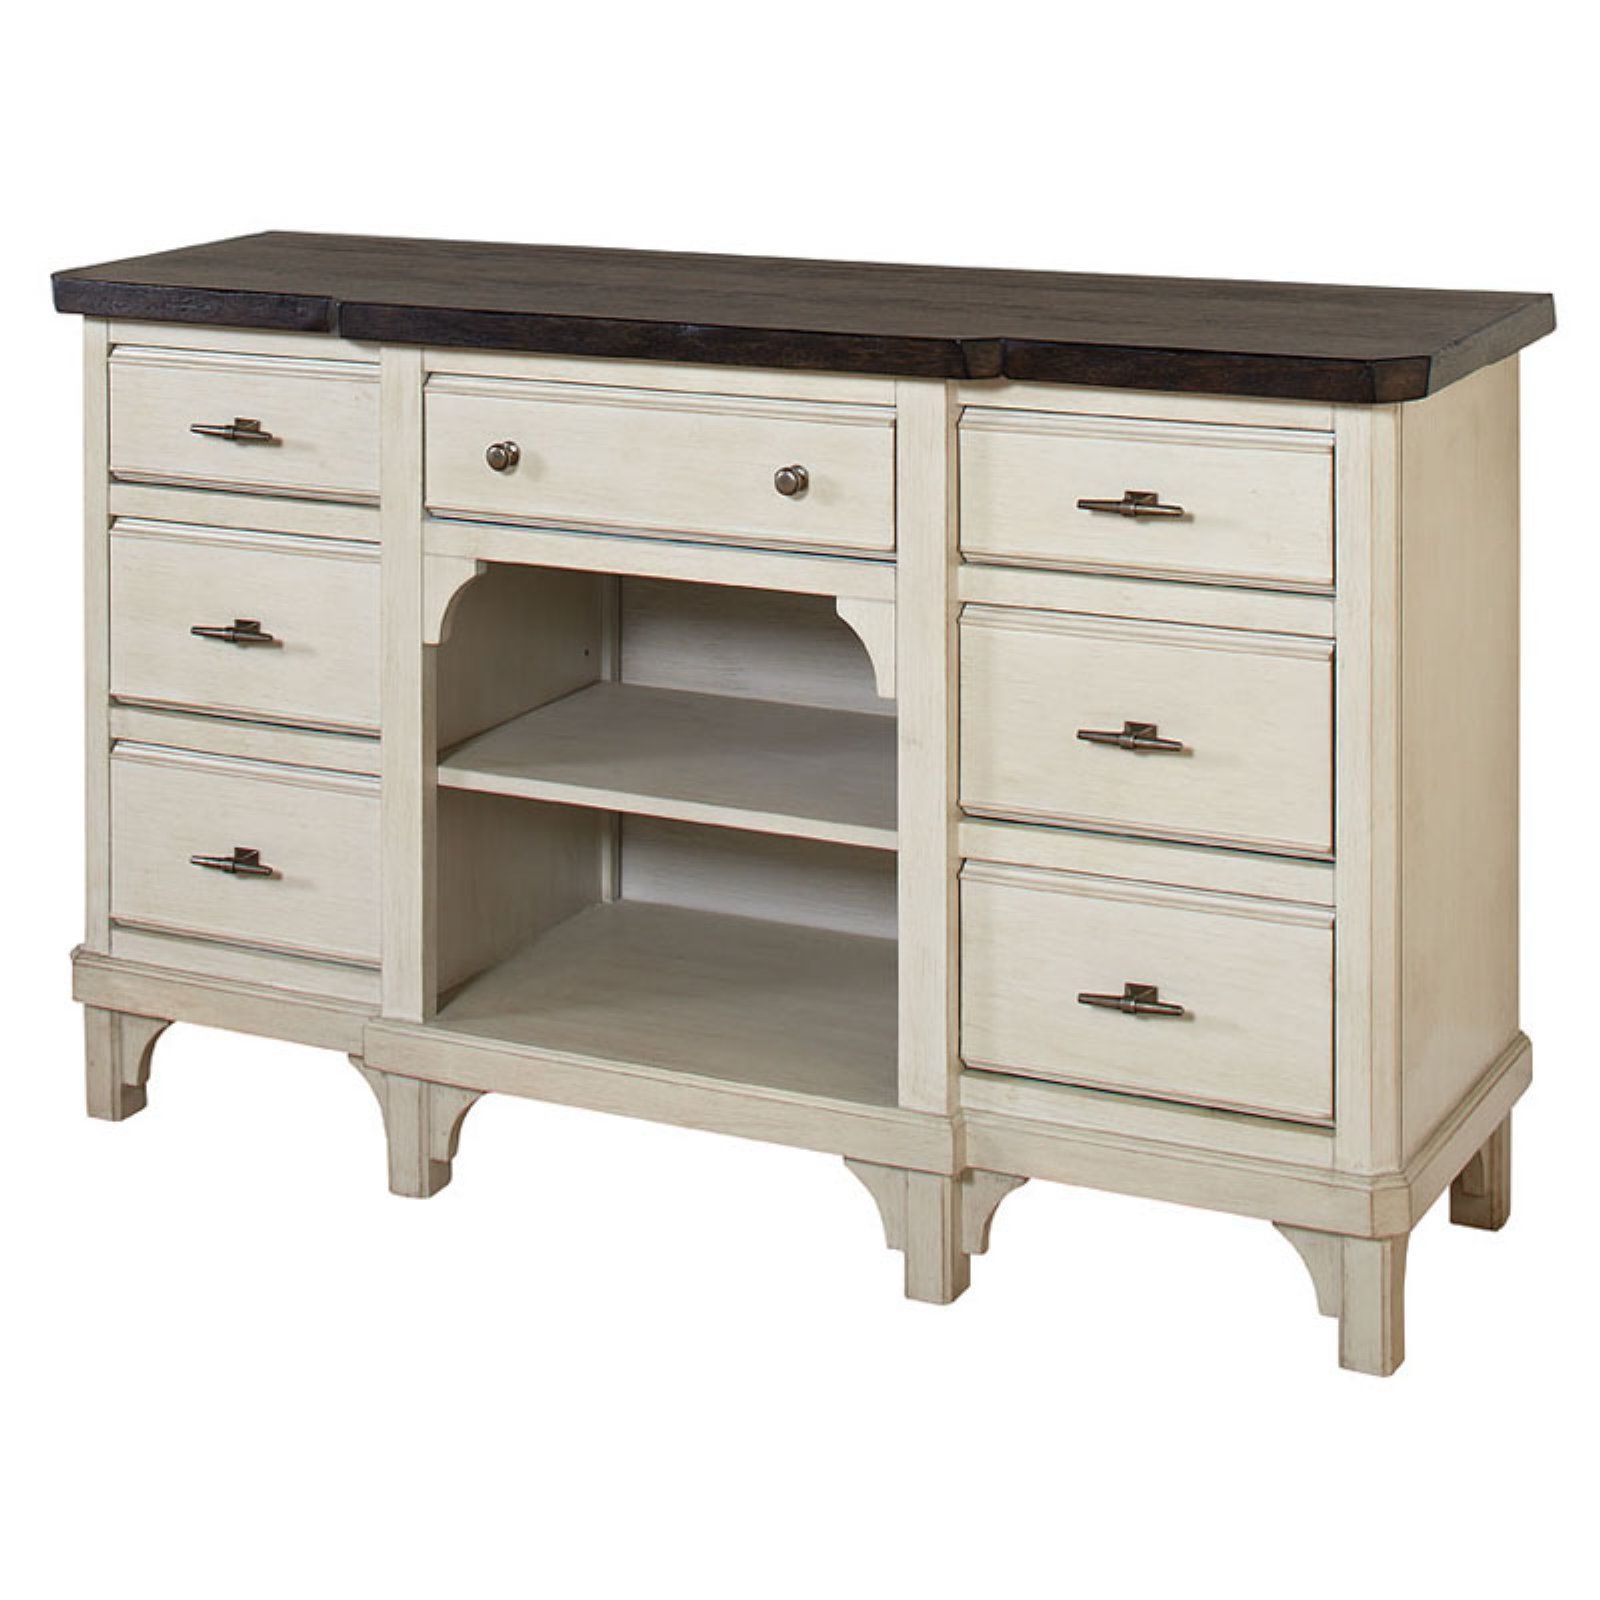 Avalon Furniture Mystic Cay Sideboard (View 18 of 20)